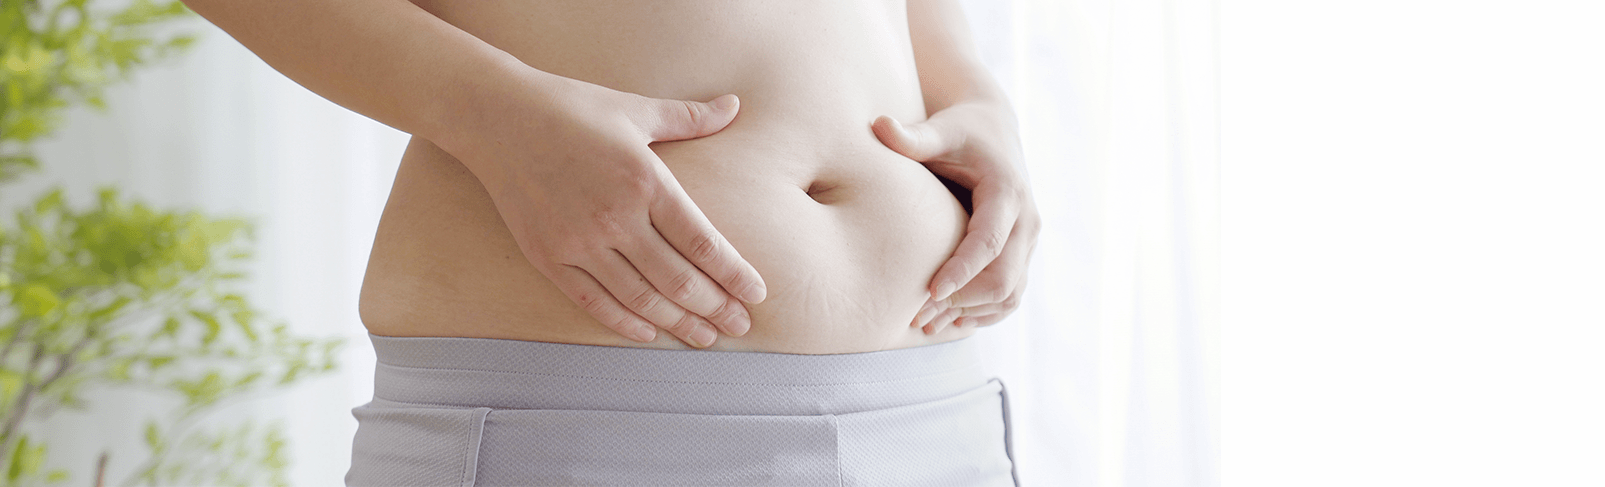 What is Hormonal Belly Fat, and How Can You Get Rid of It?